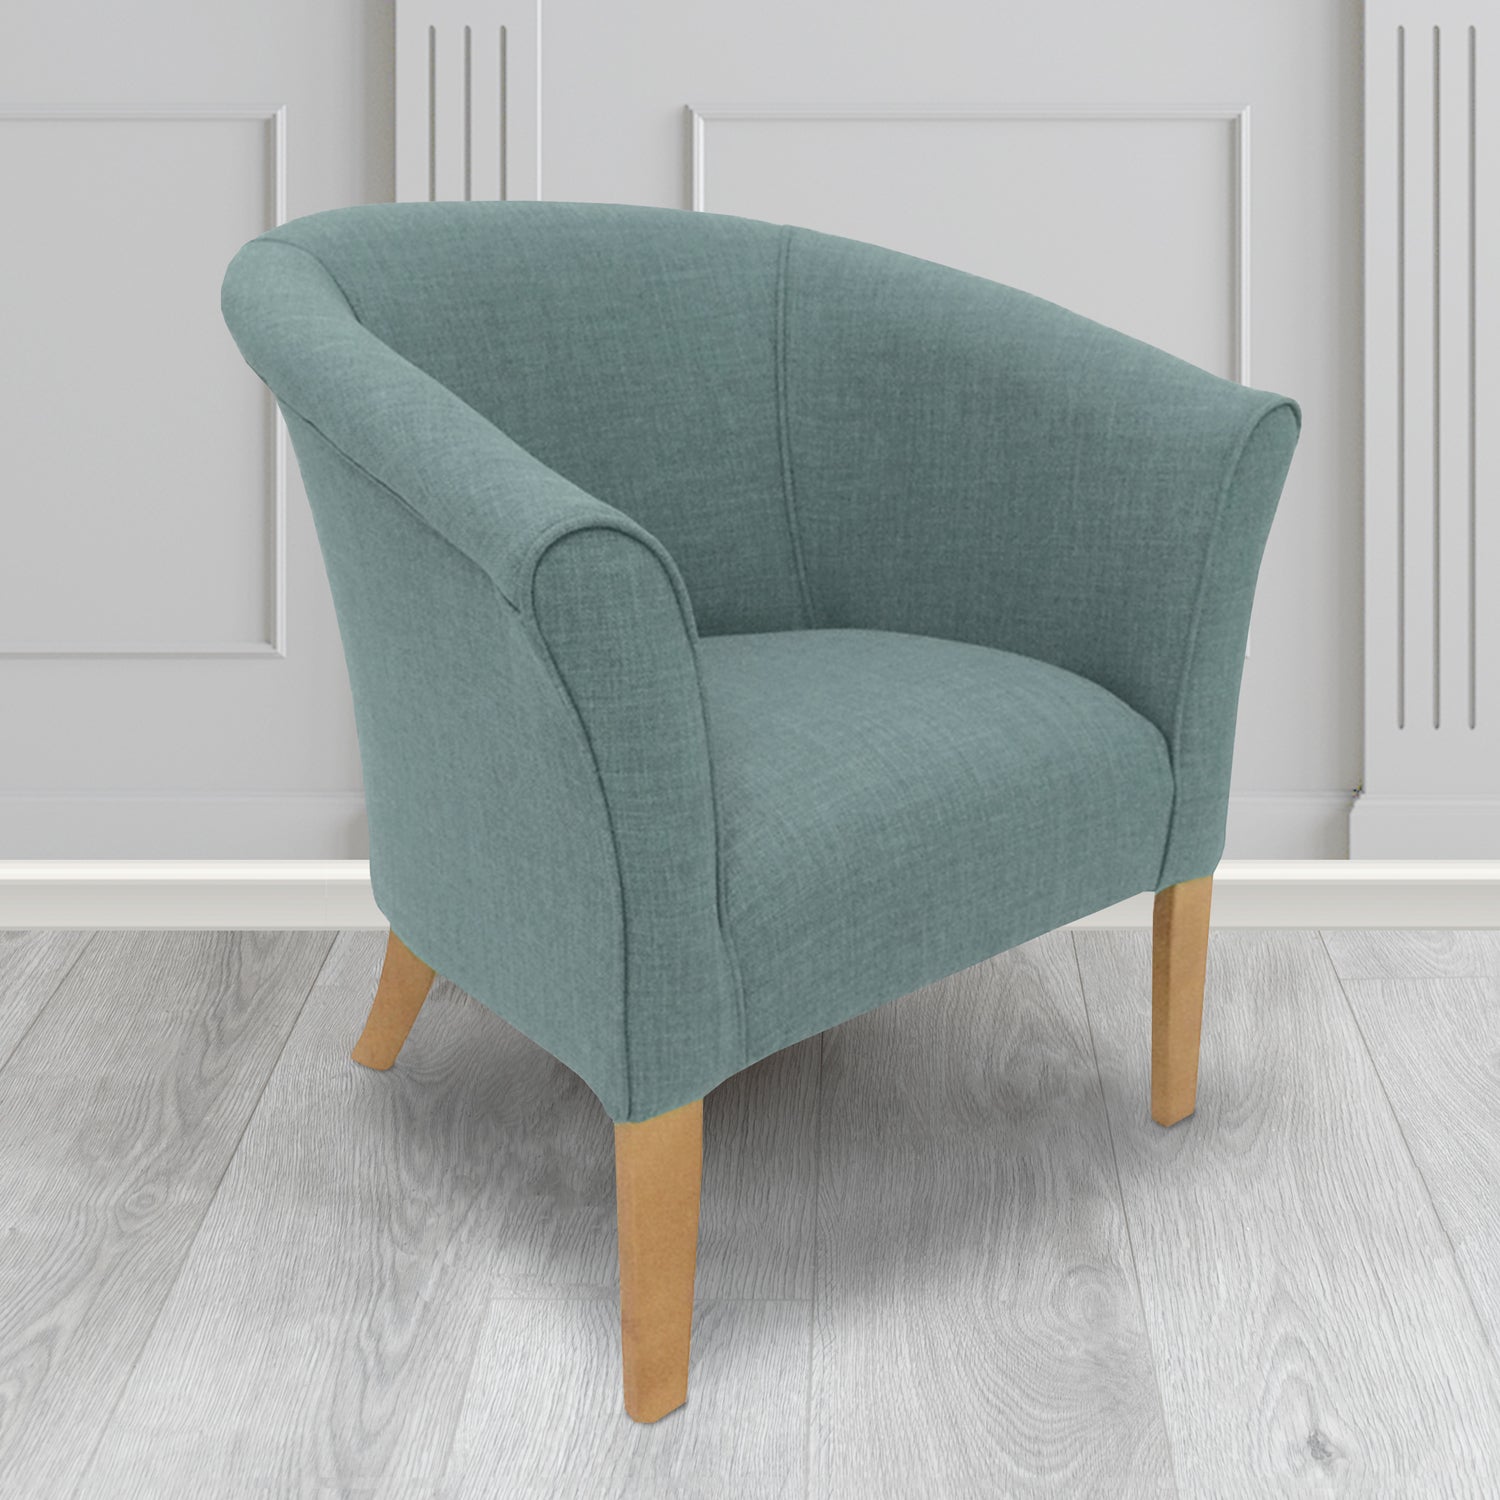 Quill Tub Chair in Linetta Duck Egg Crib 5 Plain Fabric - Antimicrobial, Stain Resistant & Waterproof - The Tub Chair Shop